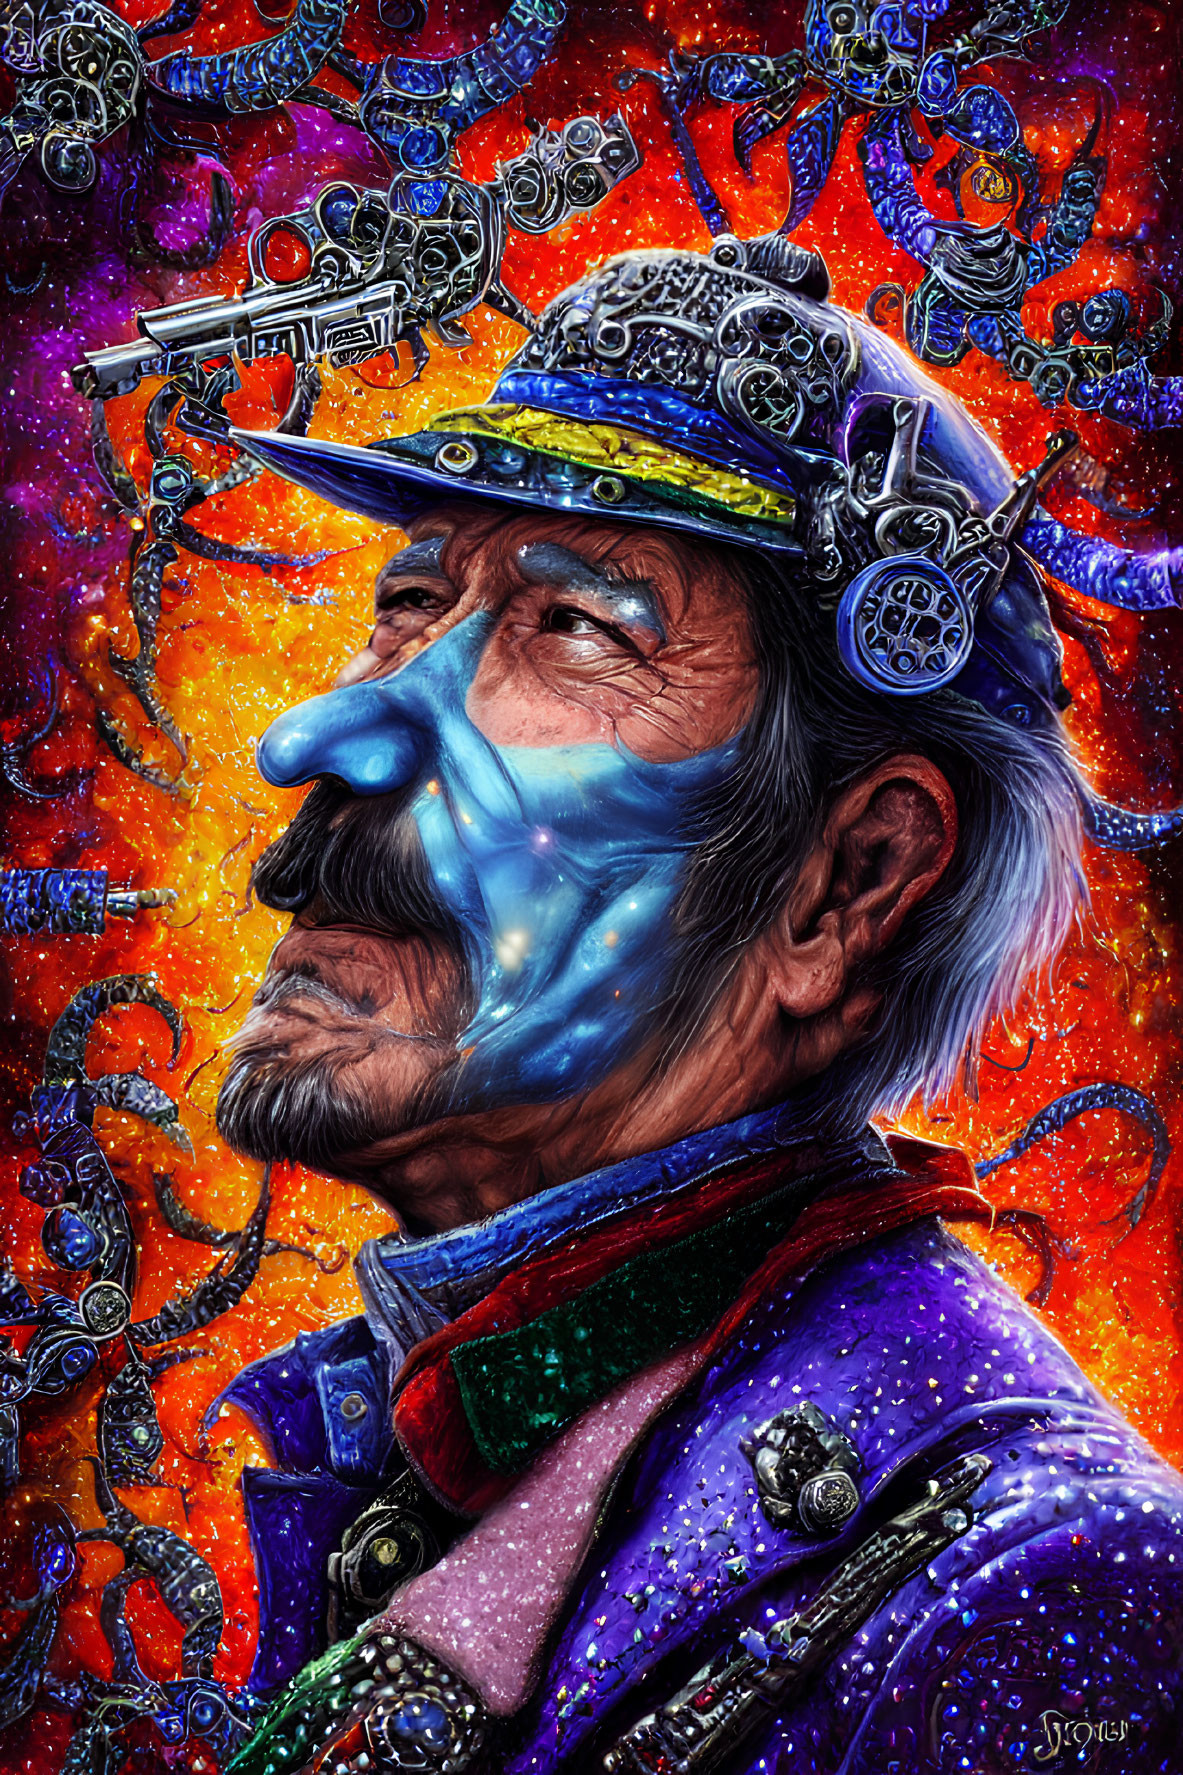 Colorful man with steampunk hat and galaxy face paint in cosmic setting